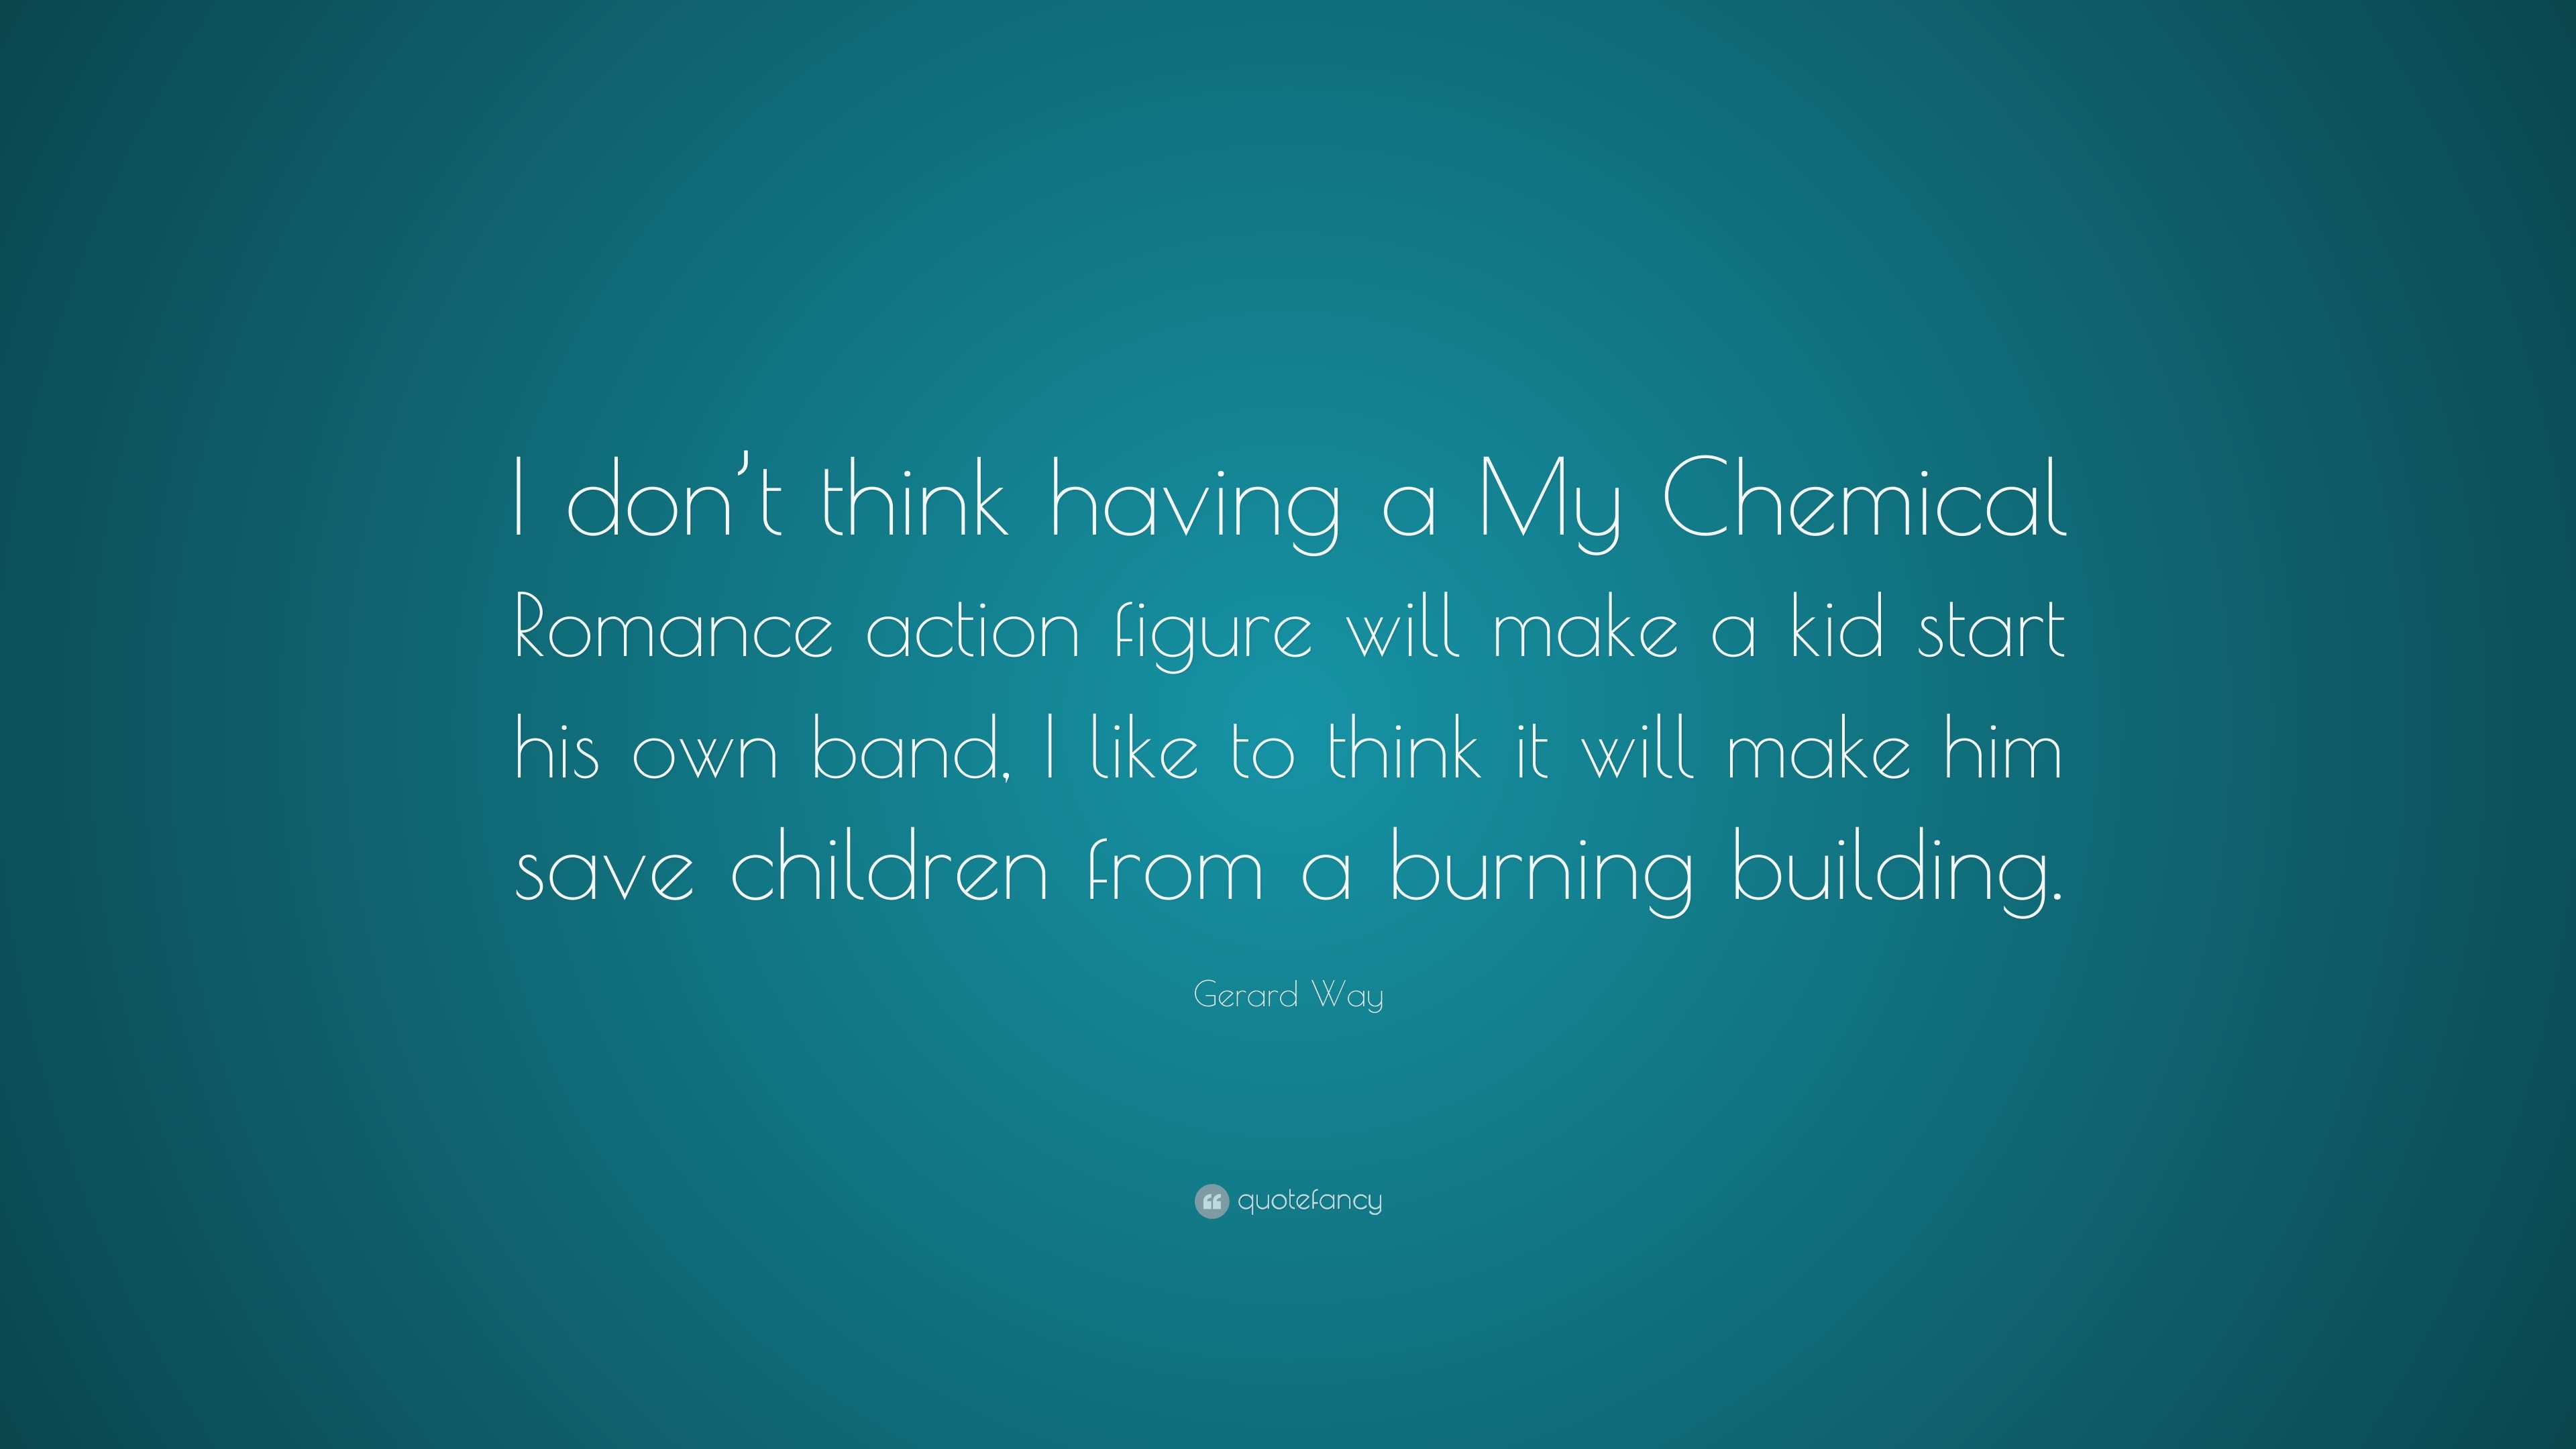 3840x2160 Gerard Way Quote: “I don't think having a My Chemical Romance action